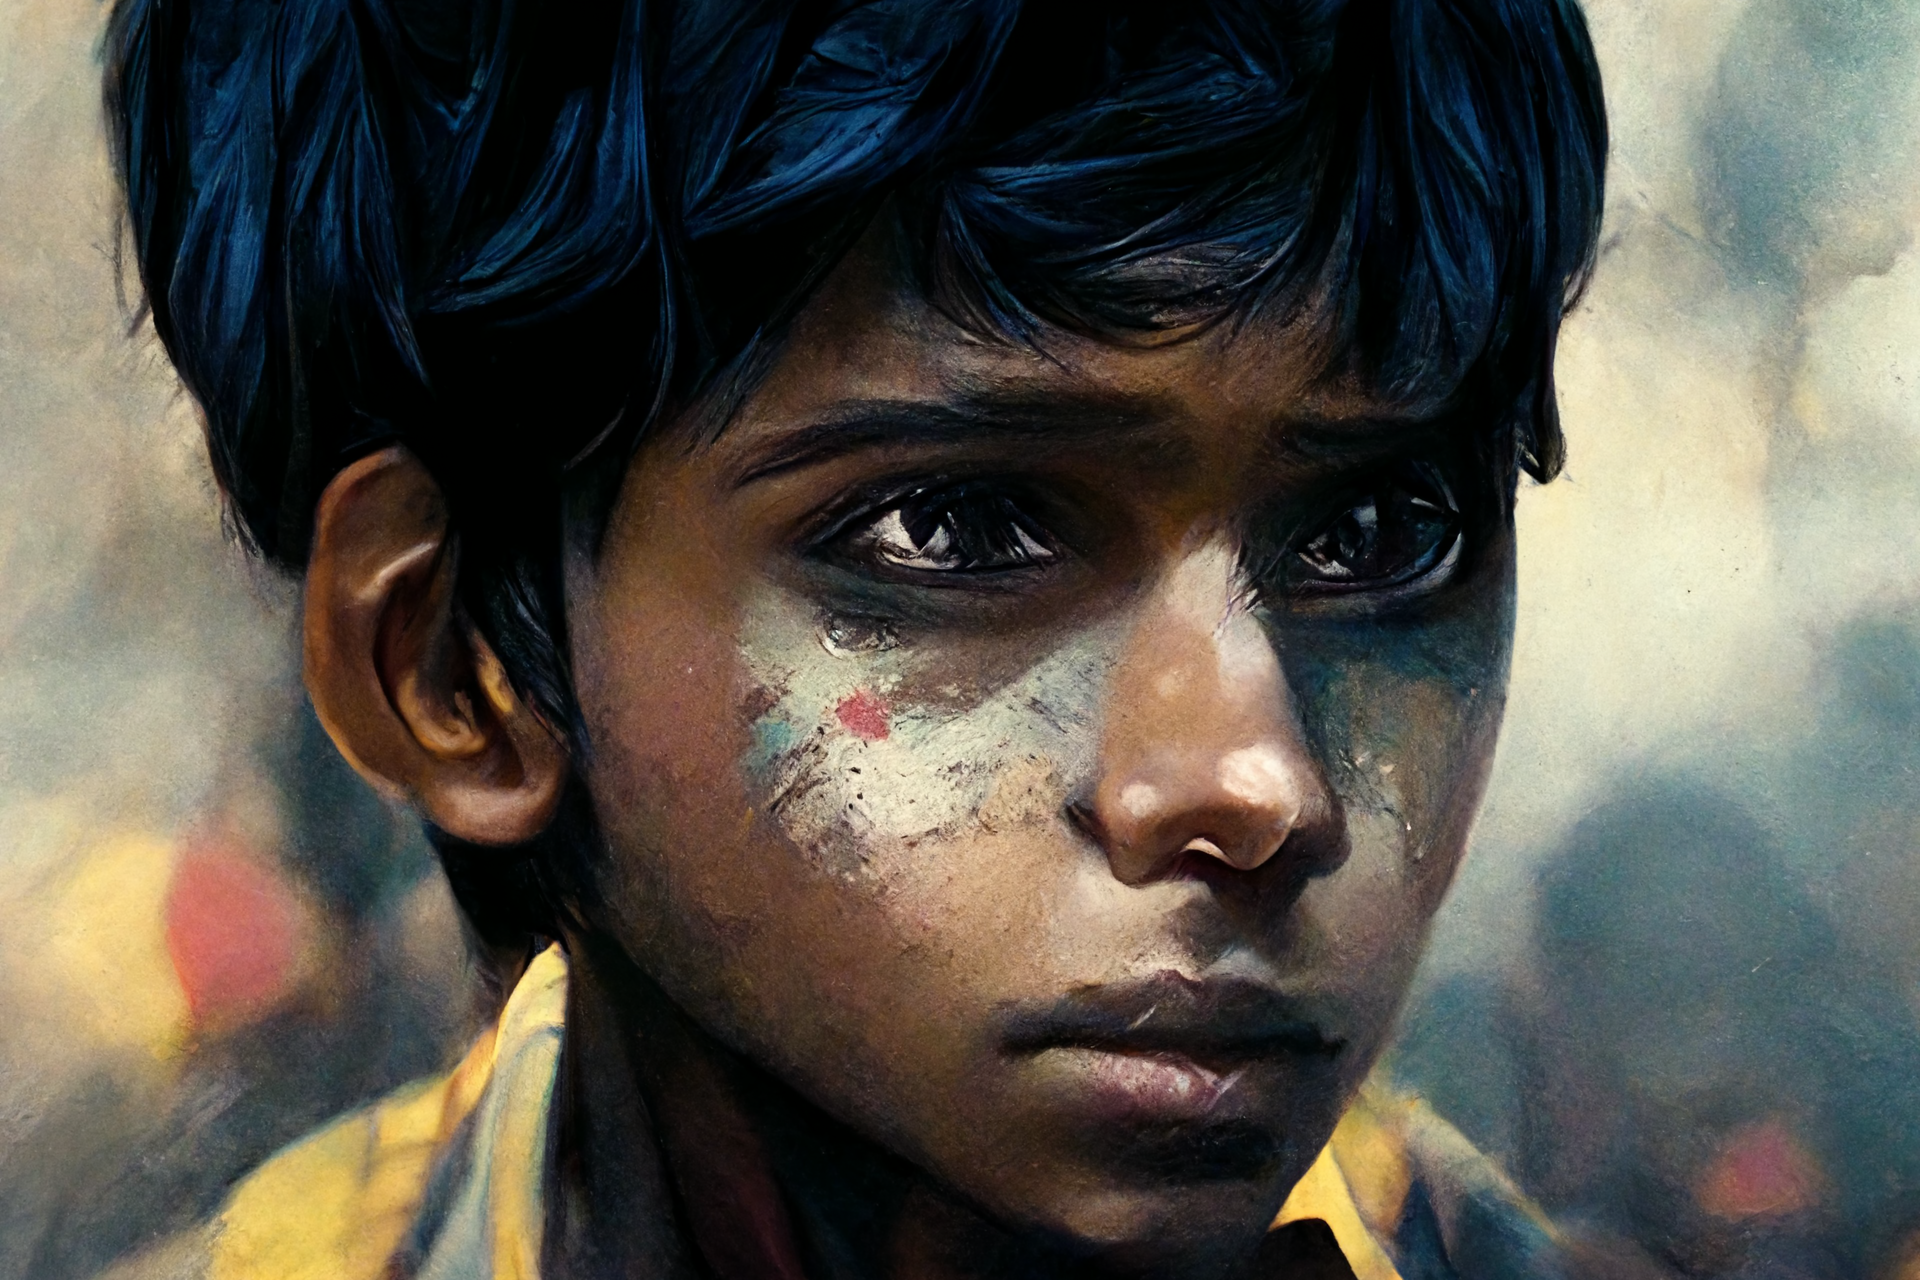 young sad boy in child labour in india, super realistic, hyper contrast